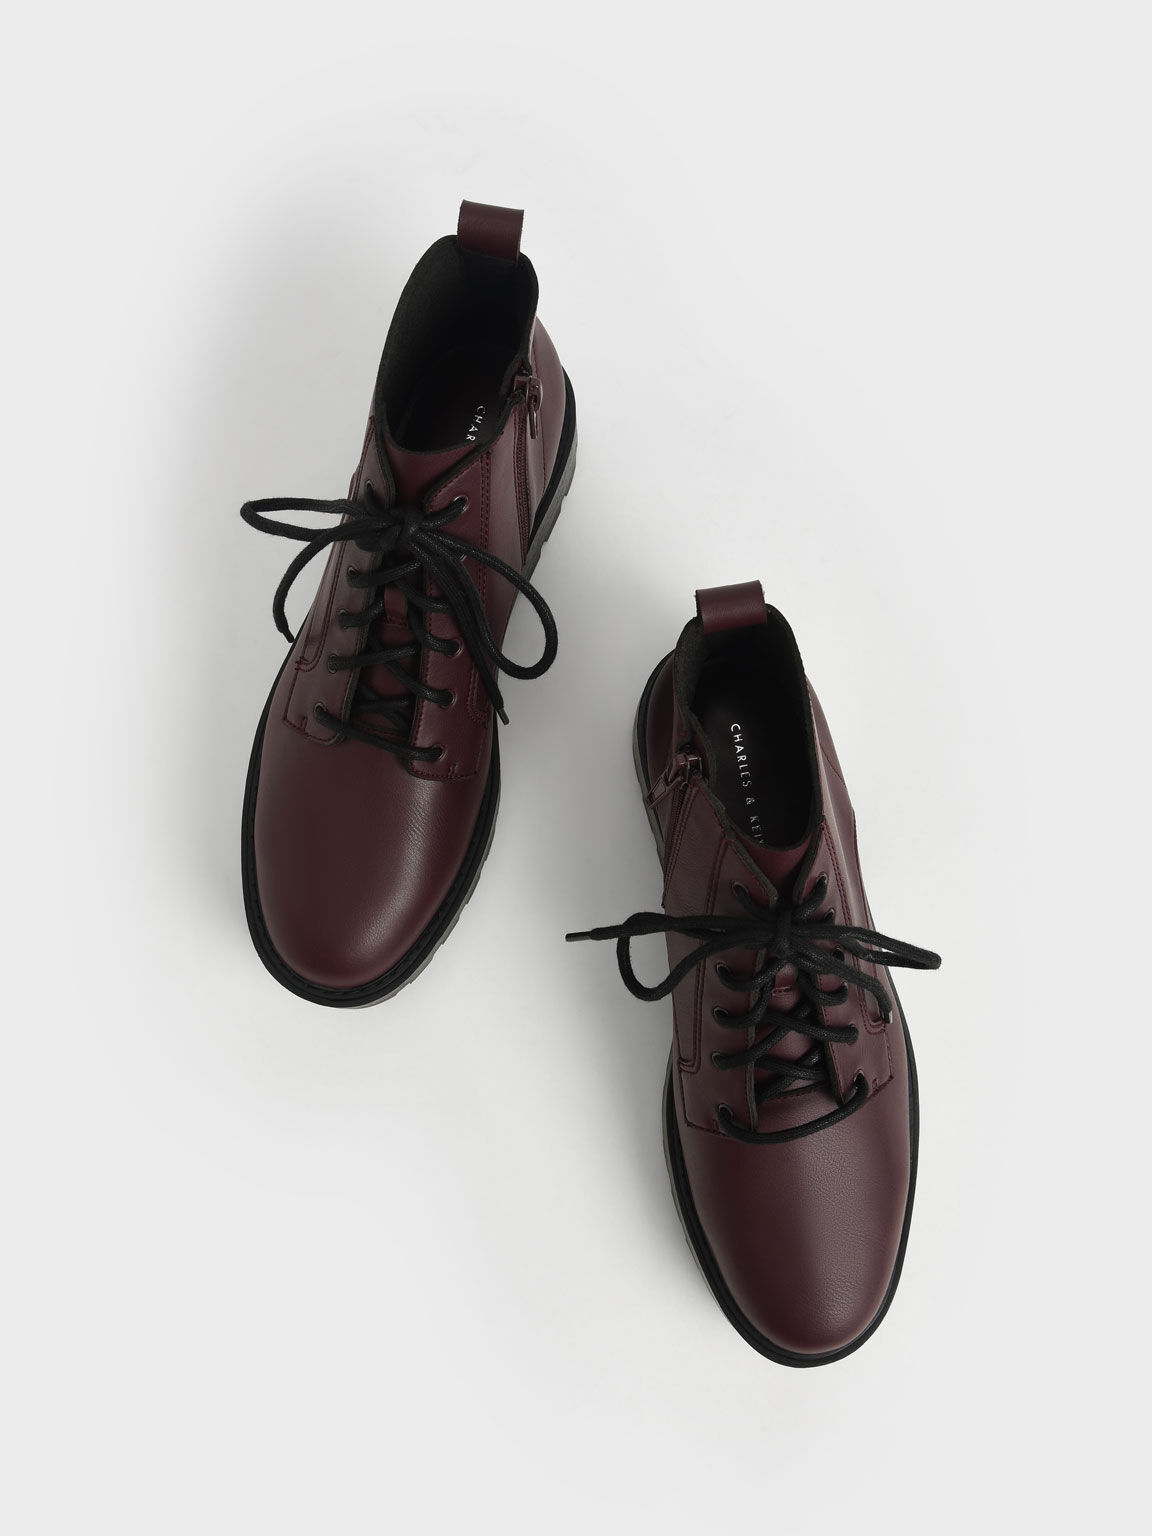 Commute Lace-Up Chunky Ankle Boots, Burgundy, hi-res